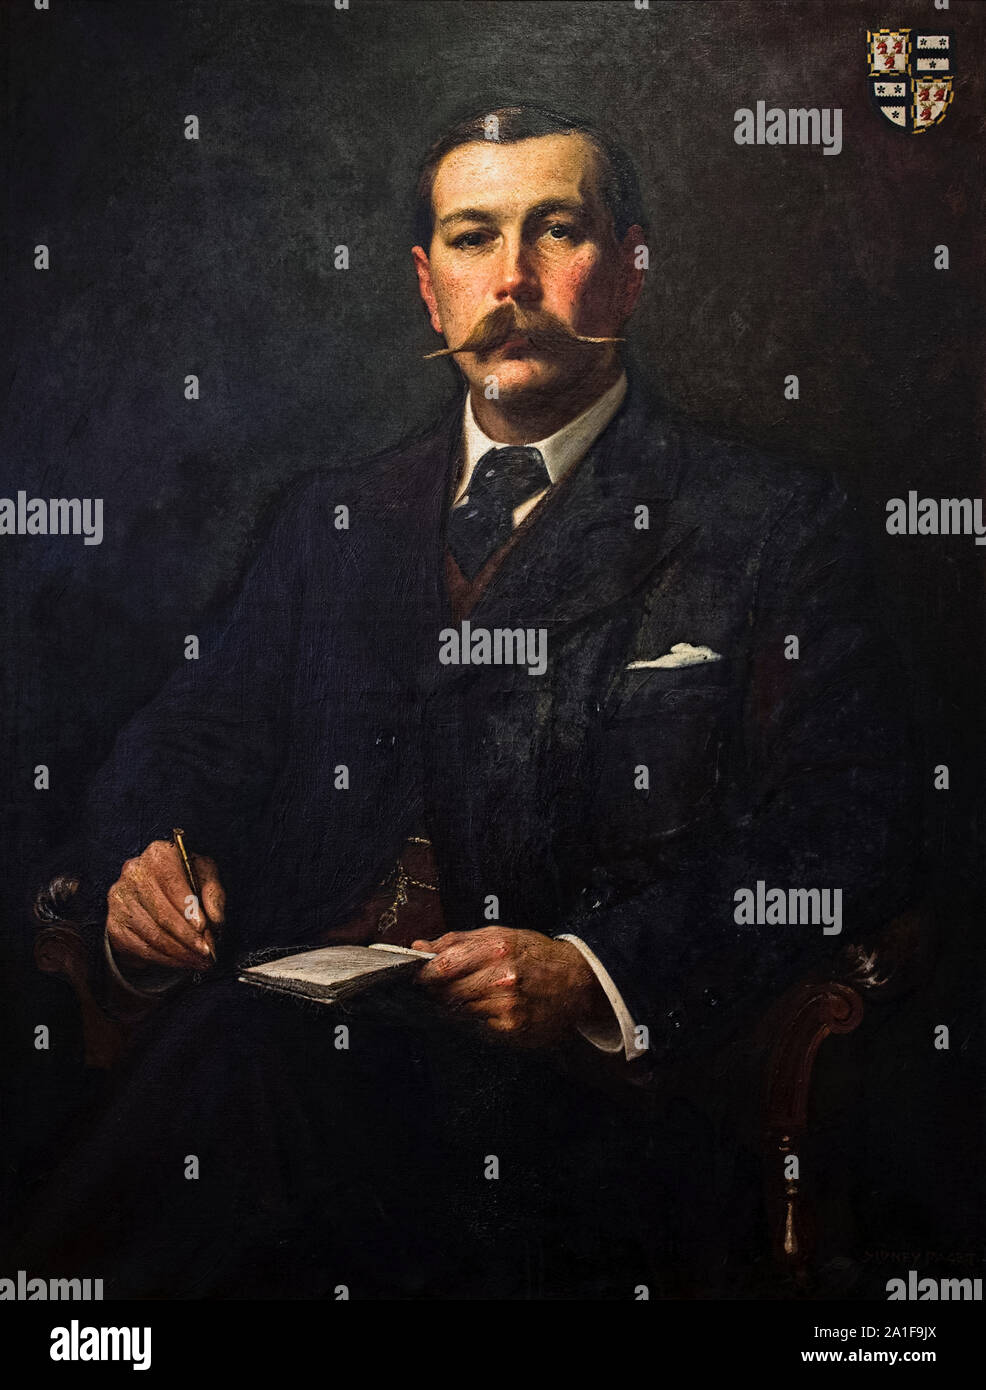 Sir Arthur Conan Doyle (1859-1930) British writer and creator of fictional detective Sherlock Holmes. Photograph of oil painting by Sidney Paget (1860-1908) who illustrated the Sherlock Holmes stories when first serialised in The Strand Magazine. Stock Photo